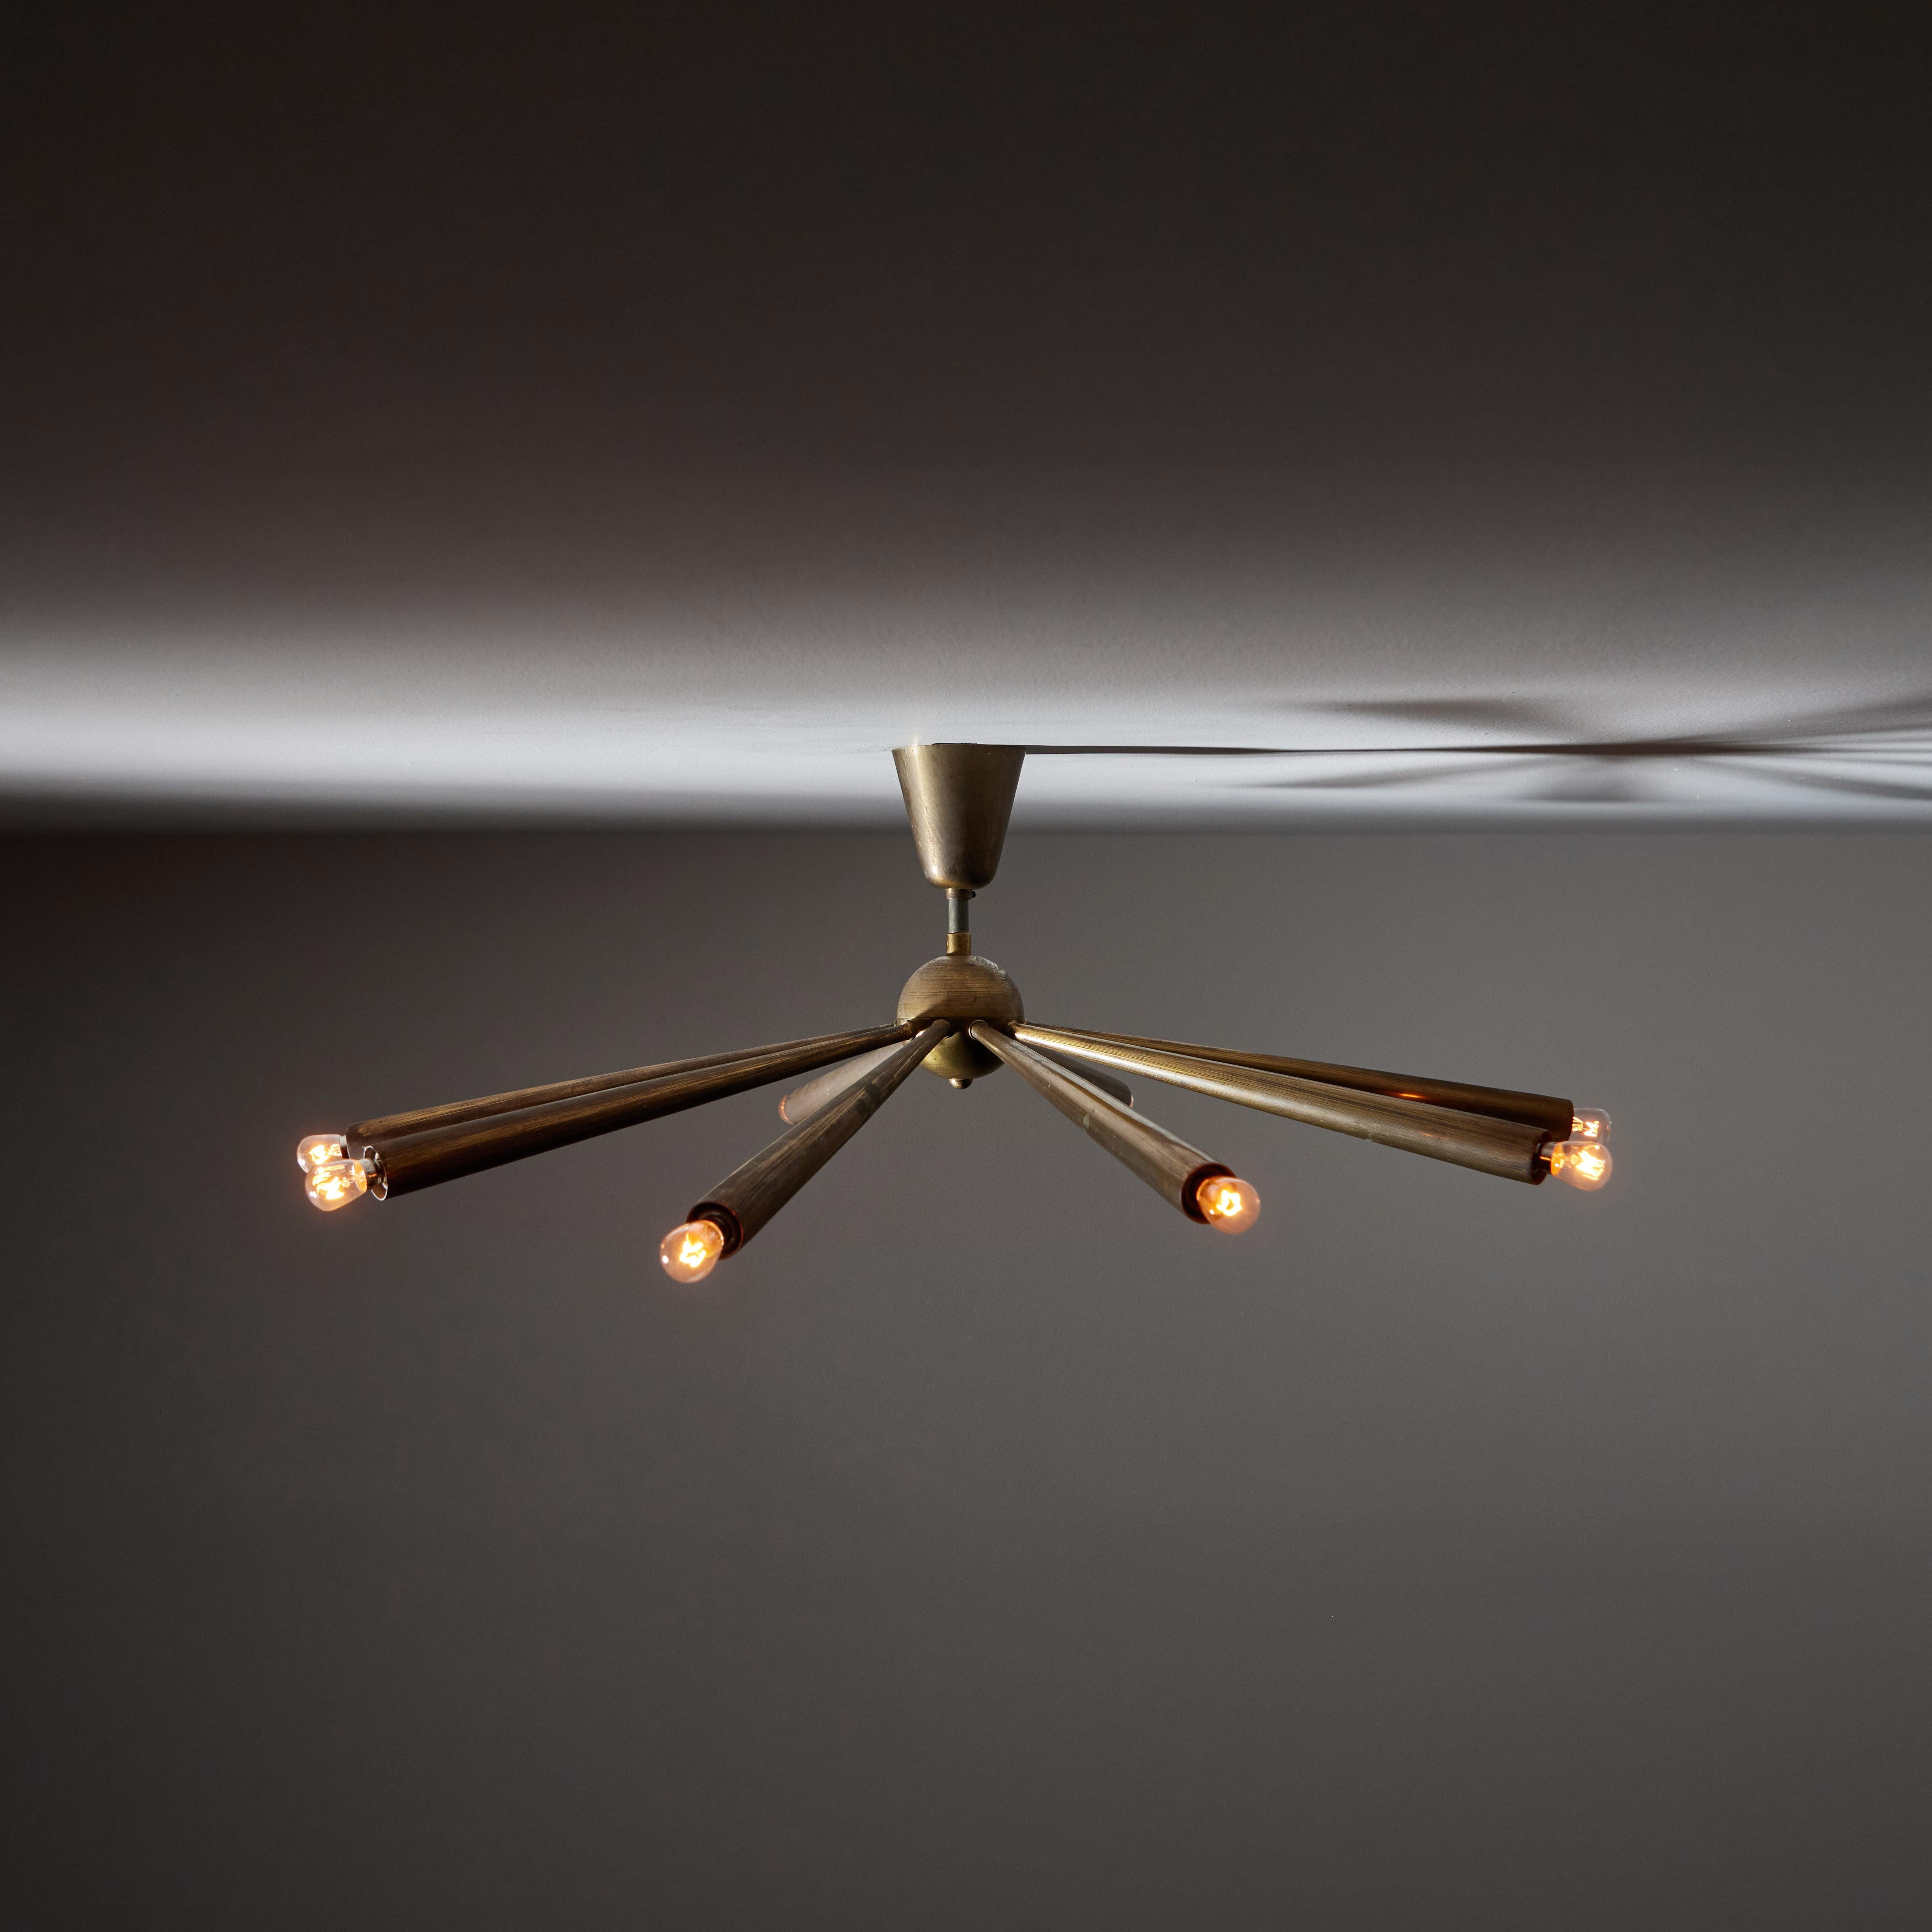 Flush mount ceiling light by Angelo Lelli for Arredoluce. Designed and manufactured in Italy, circa 1950's. Brass. Original canopy. Rewired for U.S. standards. Recommended lamping 120v 10 Qty E14 Sockets 15w Clear Bulb. Lightbulbs not included.